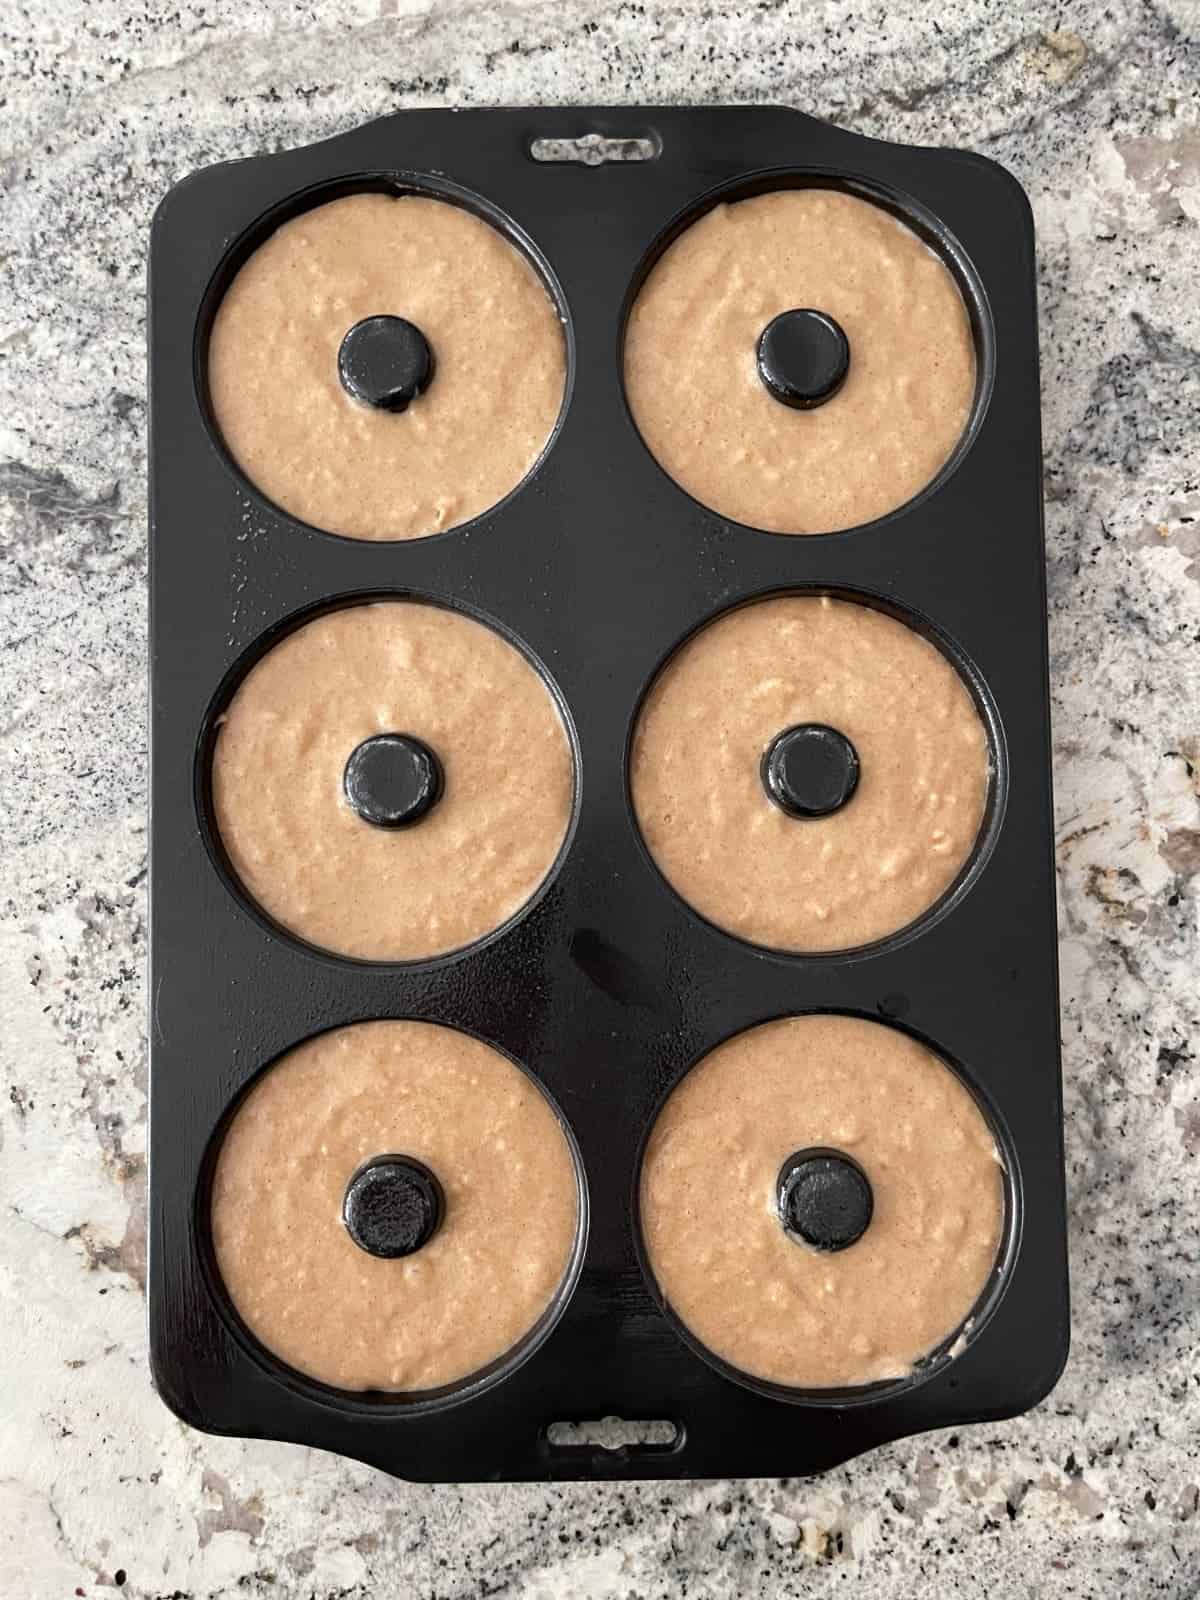 Unbaked whole wheat donuts in baking pan on granite counter.